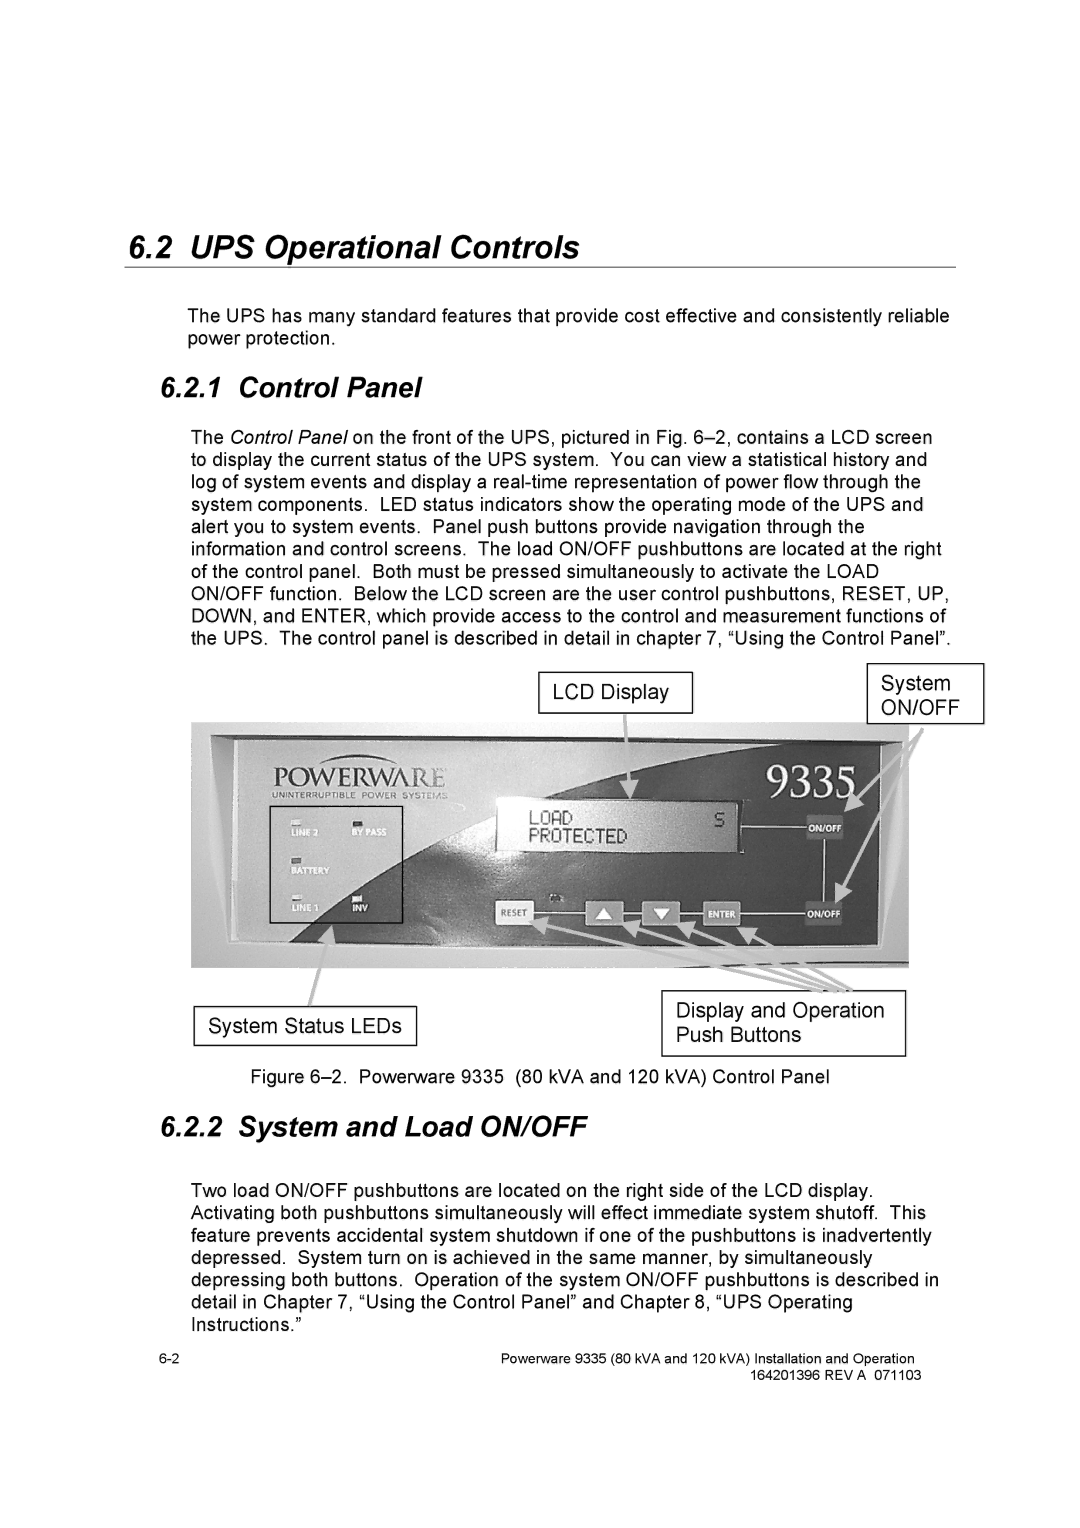 Powerware 9335 operation manual UPS Operational Controls, Control Panel, System and Load ON/OFF 